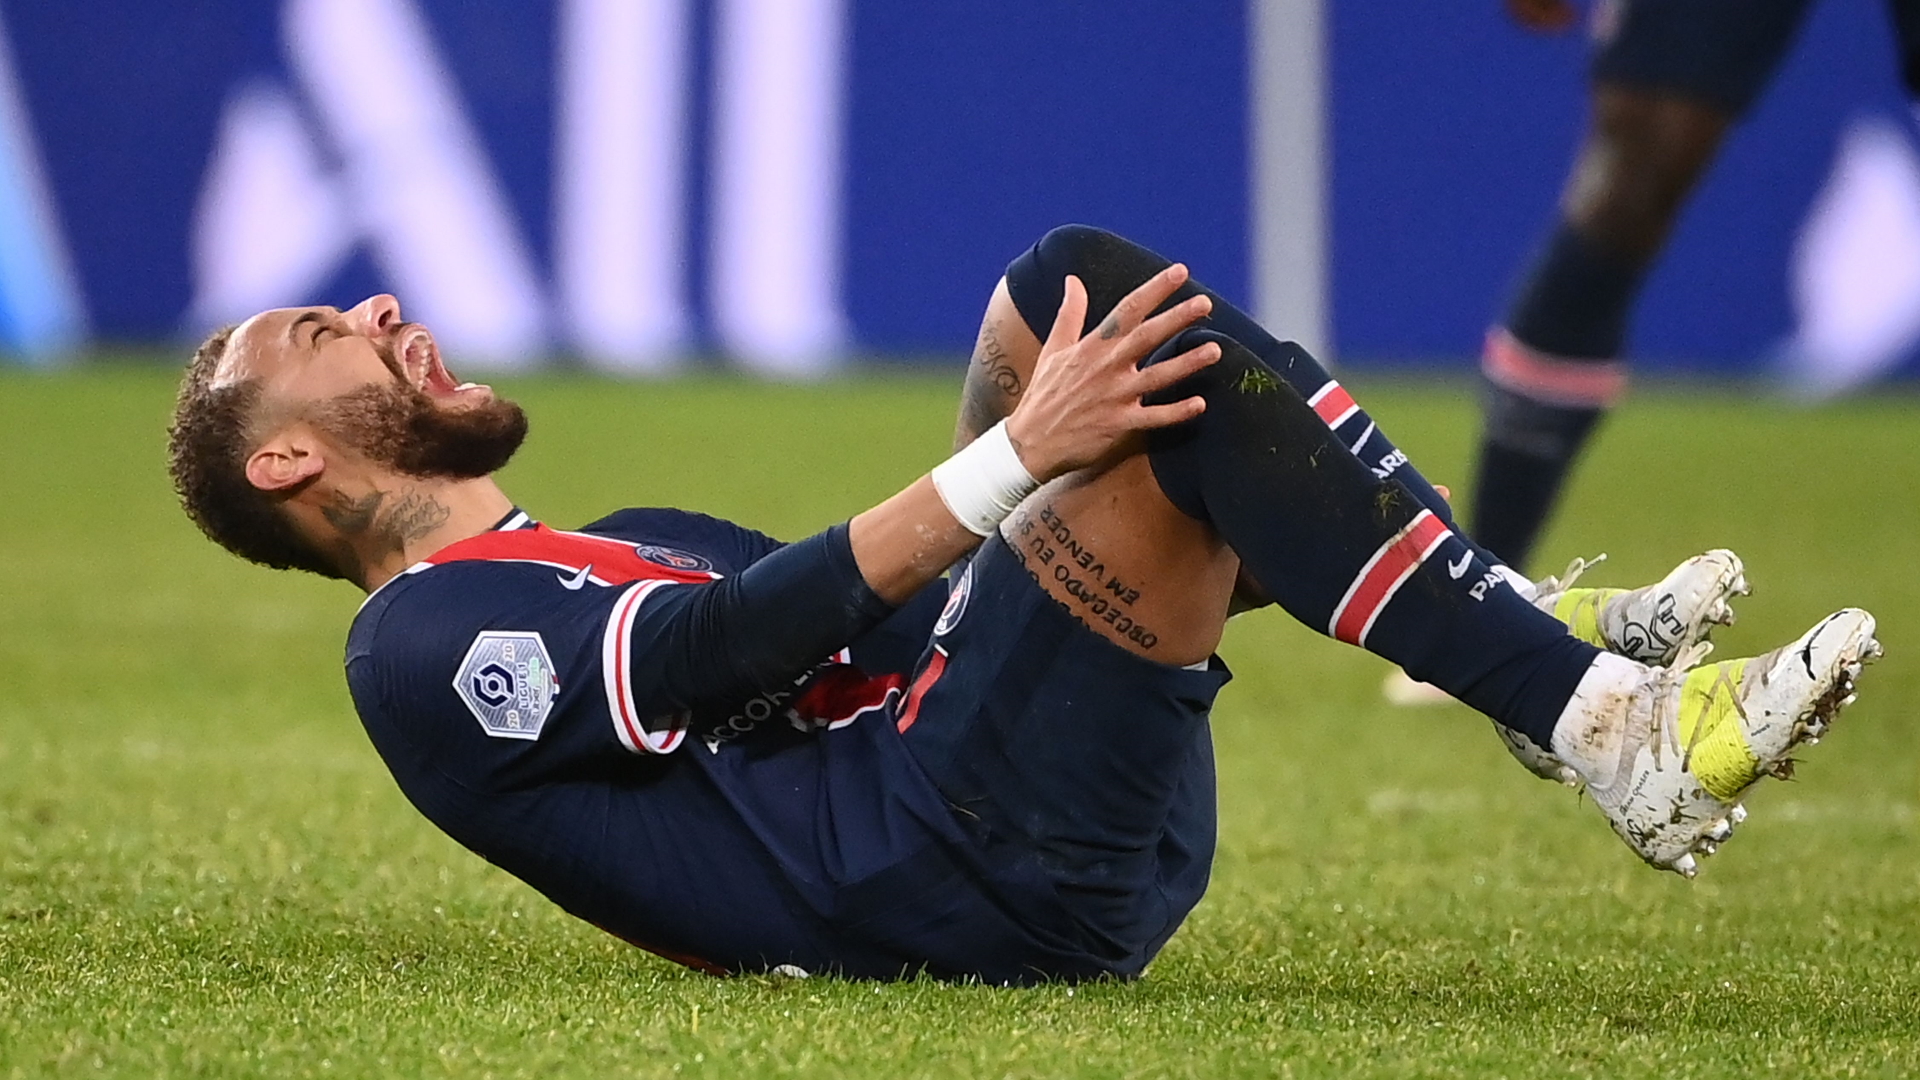 Neymar won't play again in 2020 due to ankle injury, PSG confirm